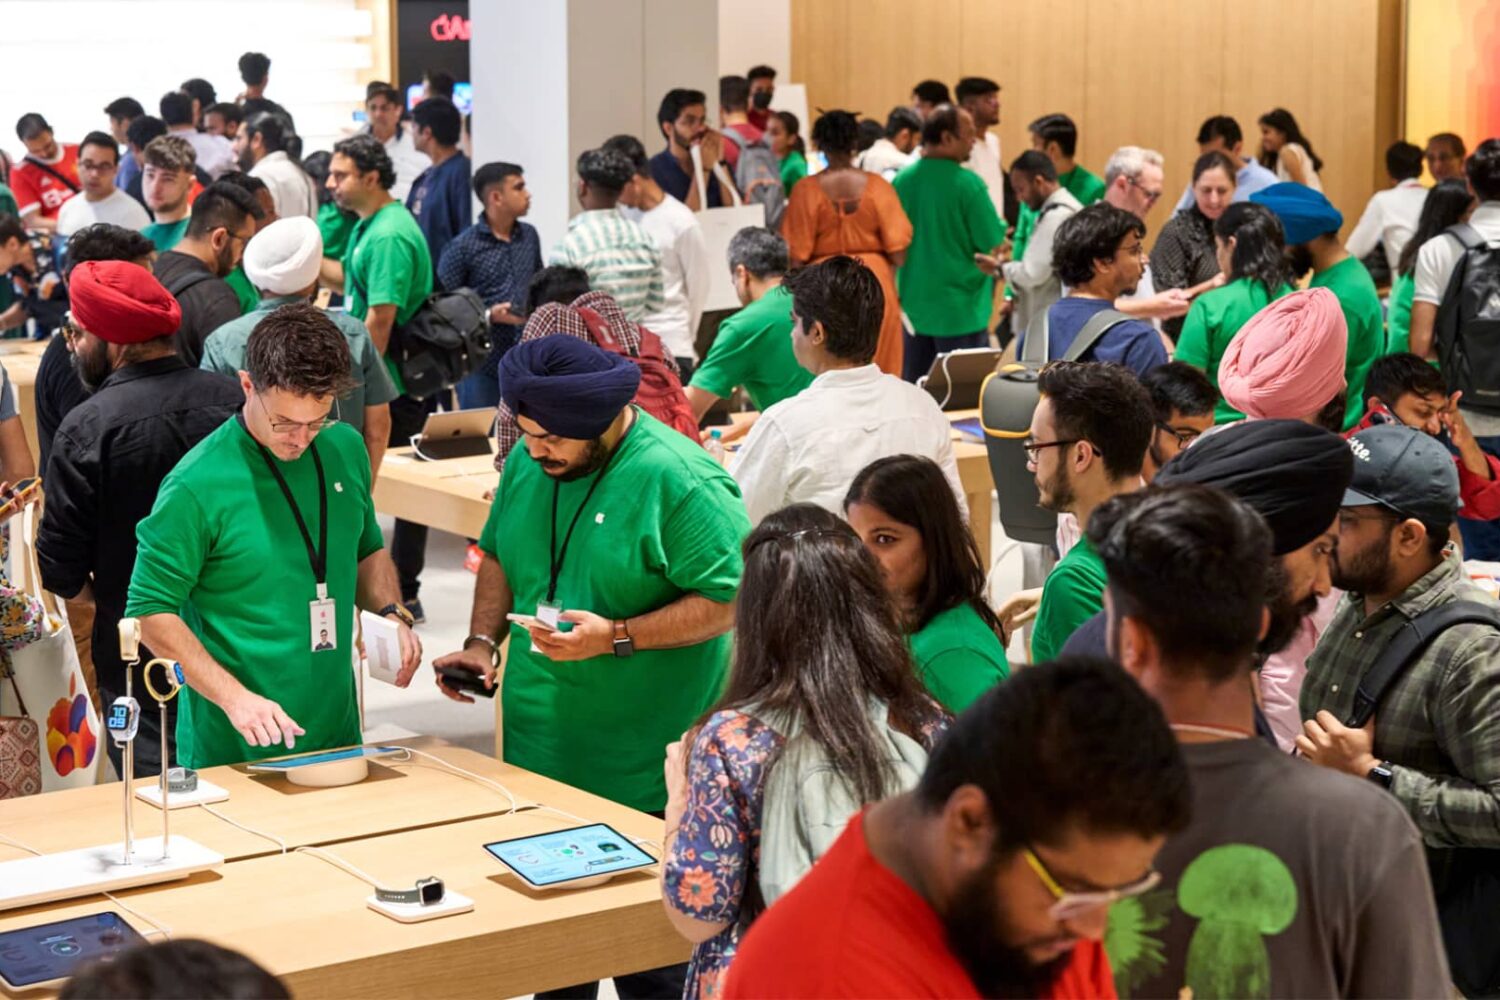 Interior shot of Apple's retail store in New Delhi showcasing crowds on opening day